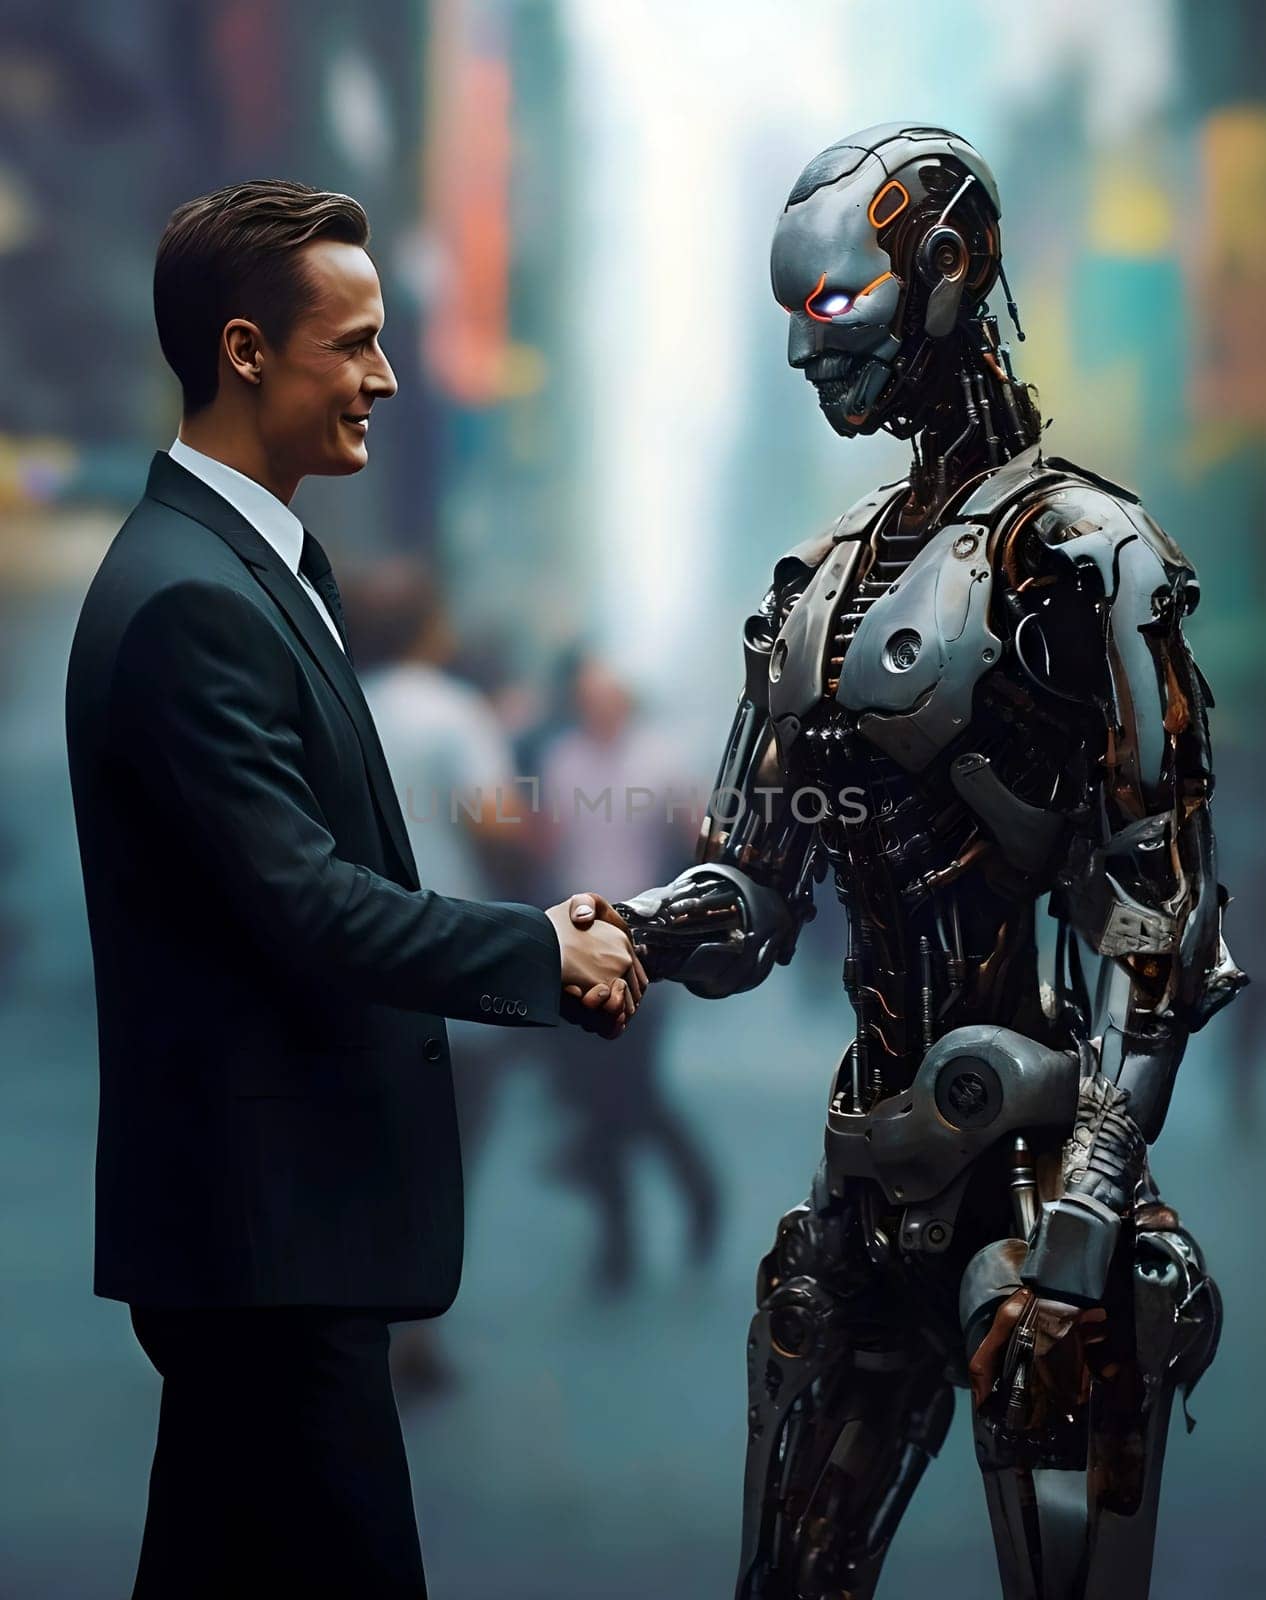 A metal robot shakes hands with a man in a suit. A city with people in the background